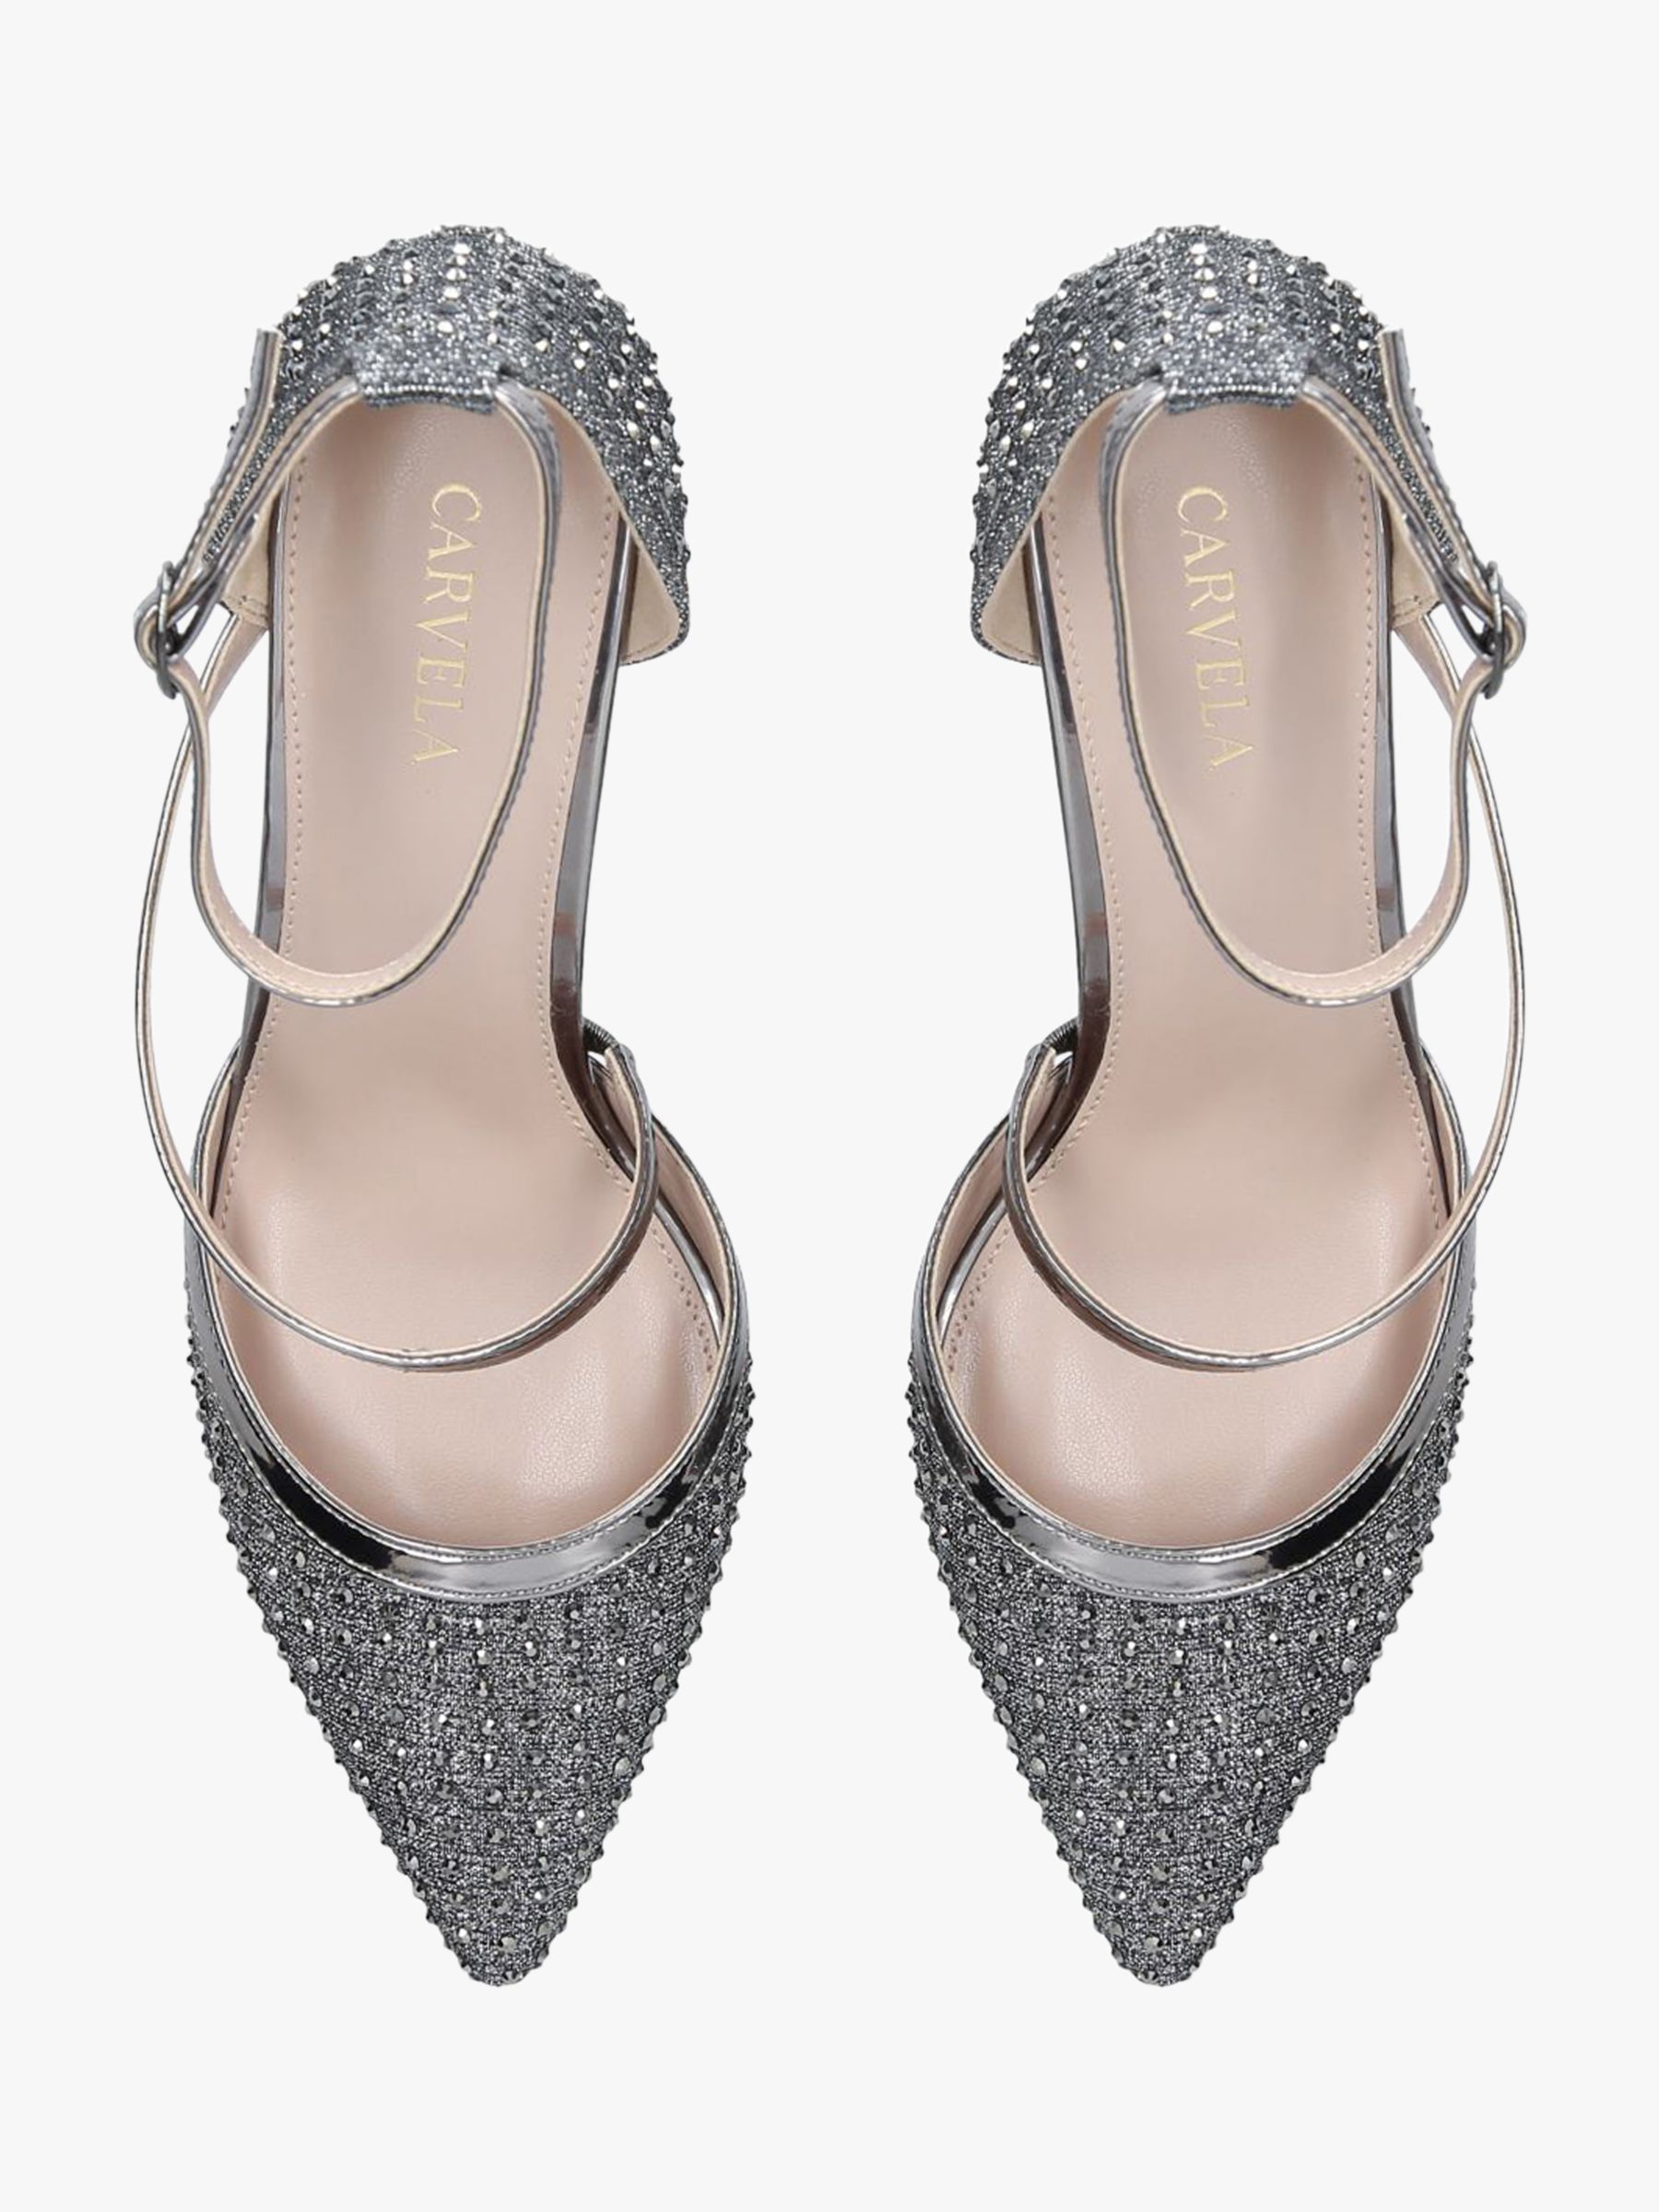 Carvela Kym Pointed Toe Cross Strap Heel Court Shoes, Grey Pewter